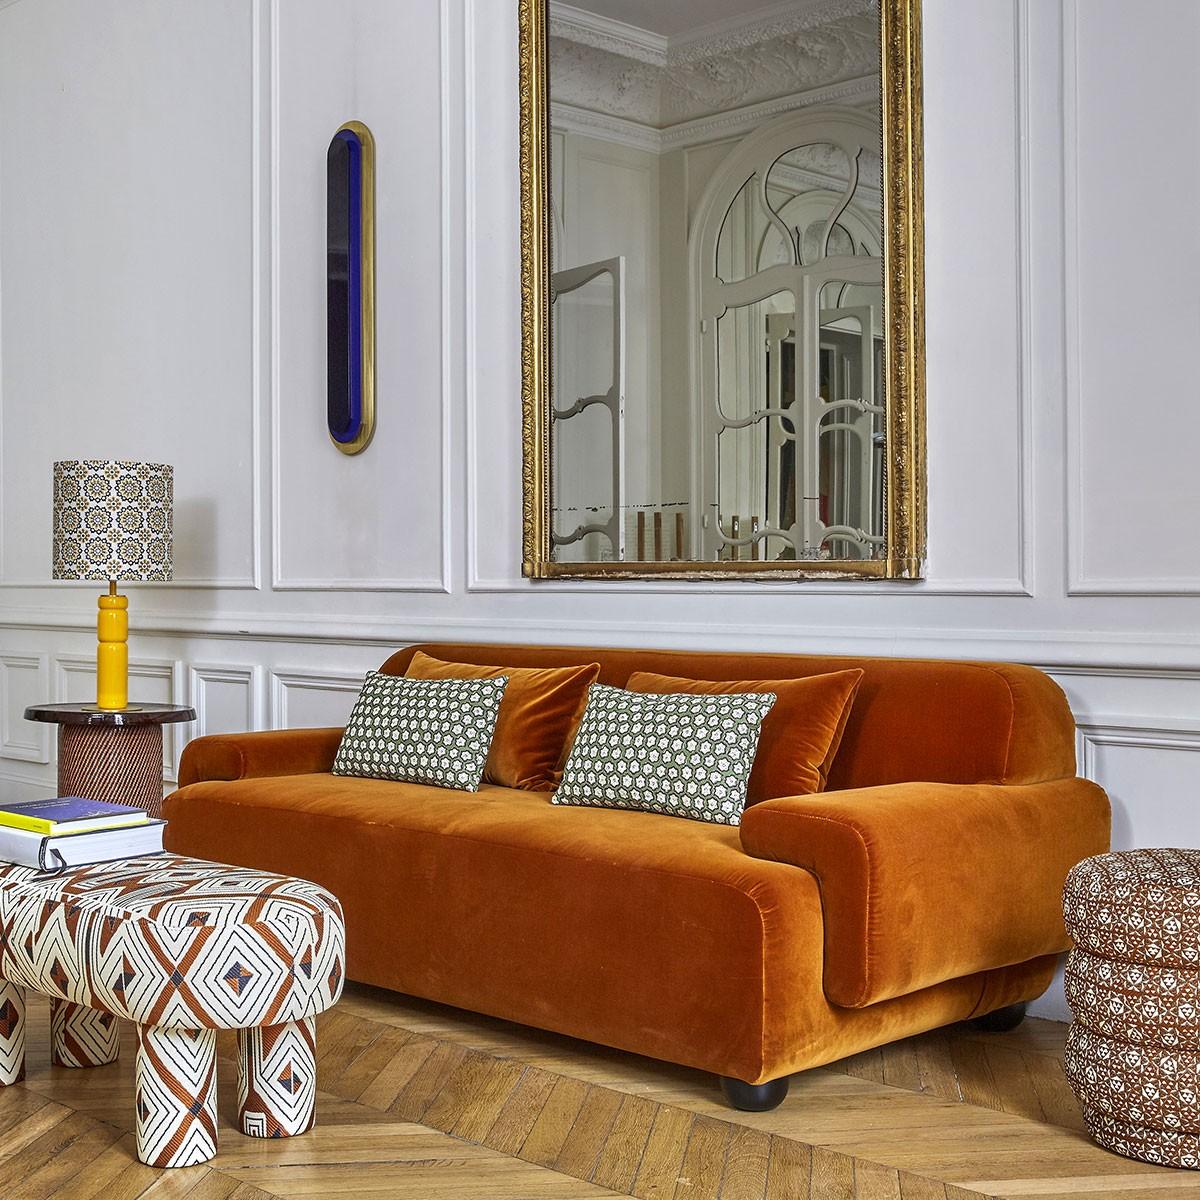 Popus Editions Lena 2.5 seater sofa in oil como velvet upholstery

It looks like it's straight out of a movie, with its generous curves and wide armrests. It is a real invitation to spend long Sundays with the family, comfortably seated in front